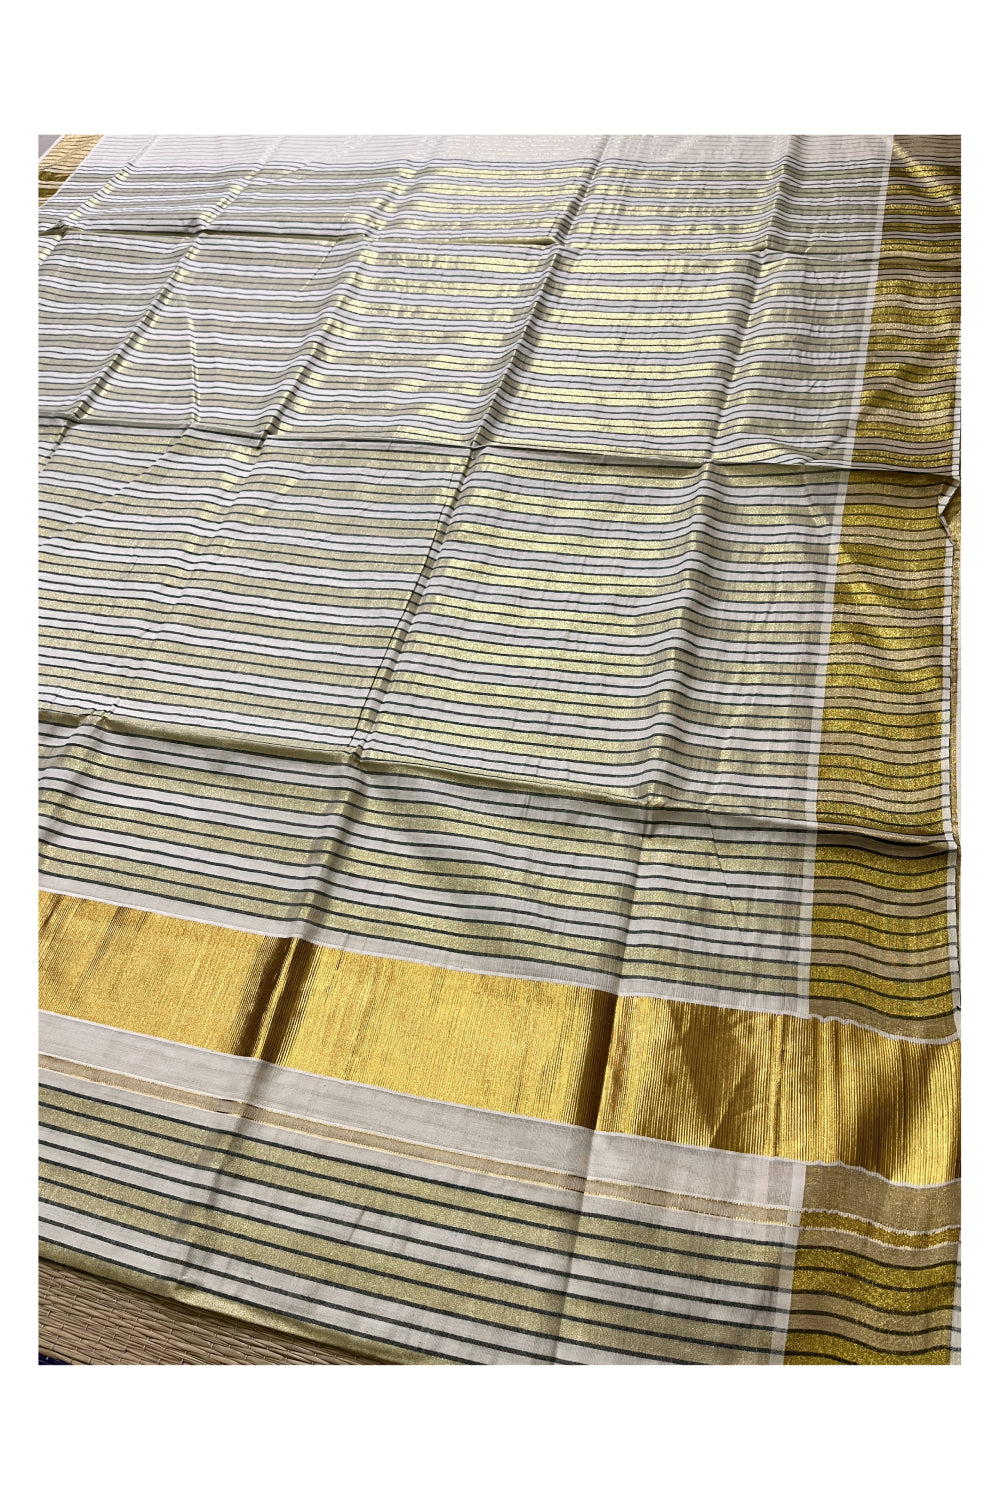 Pure Cotton Kerala Kasavu Saree with Lines Designs on Body and Dark Green Lines on Munthani